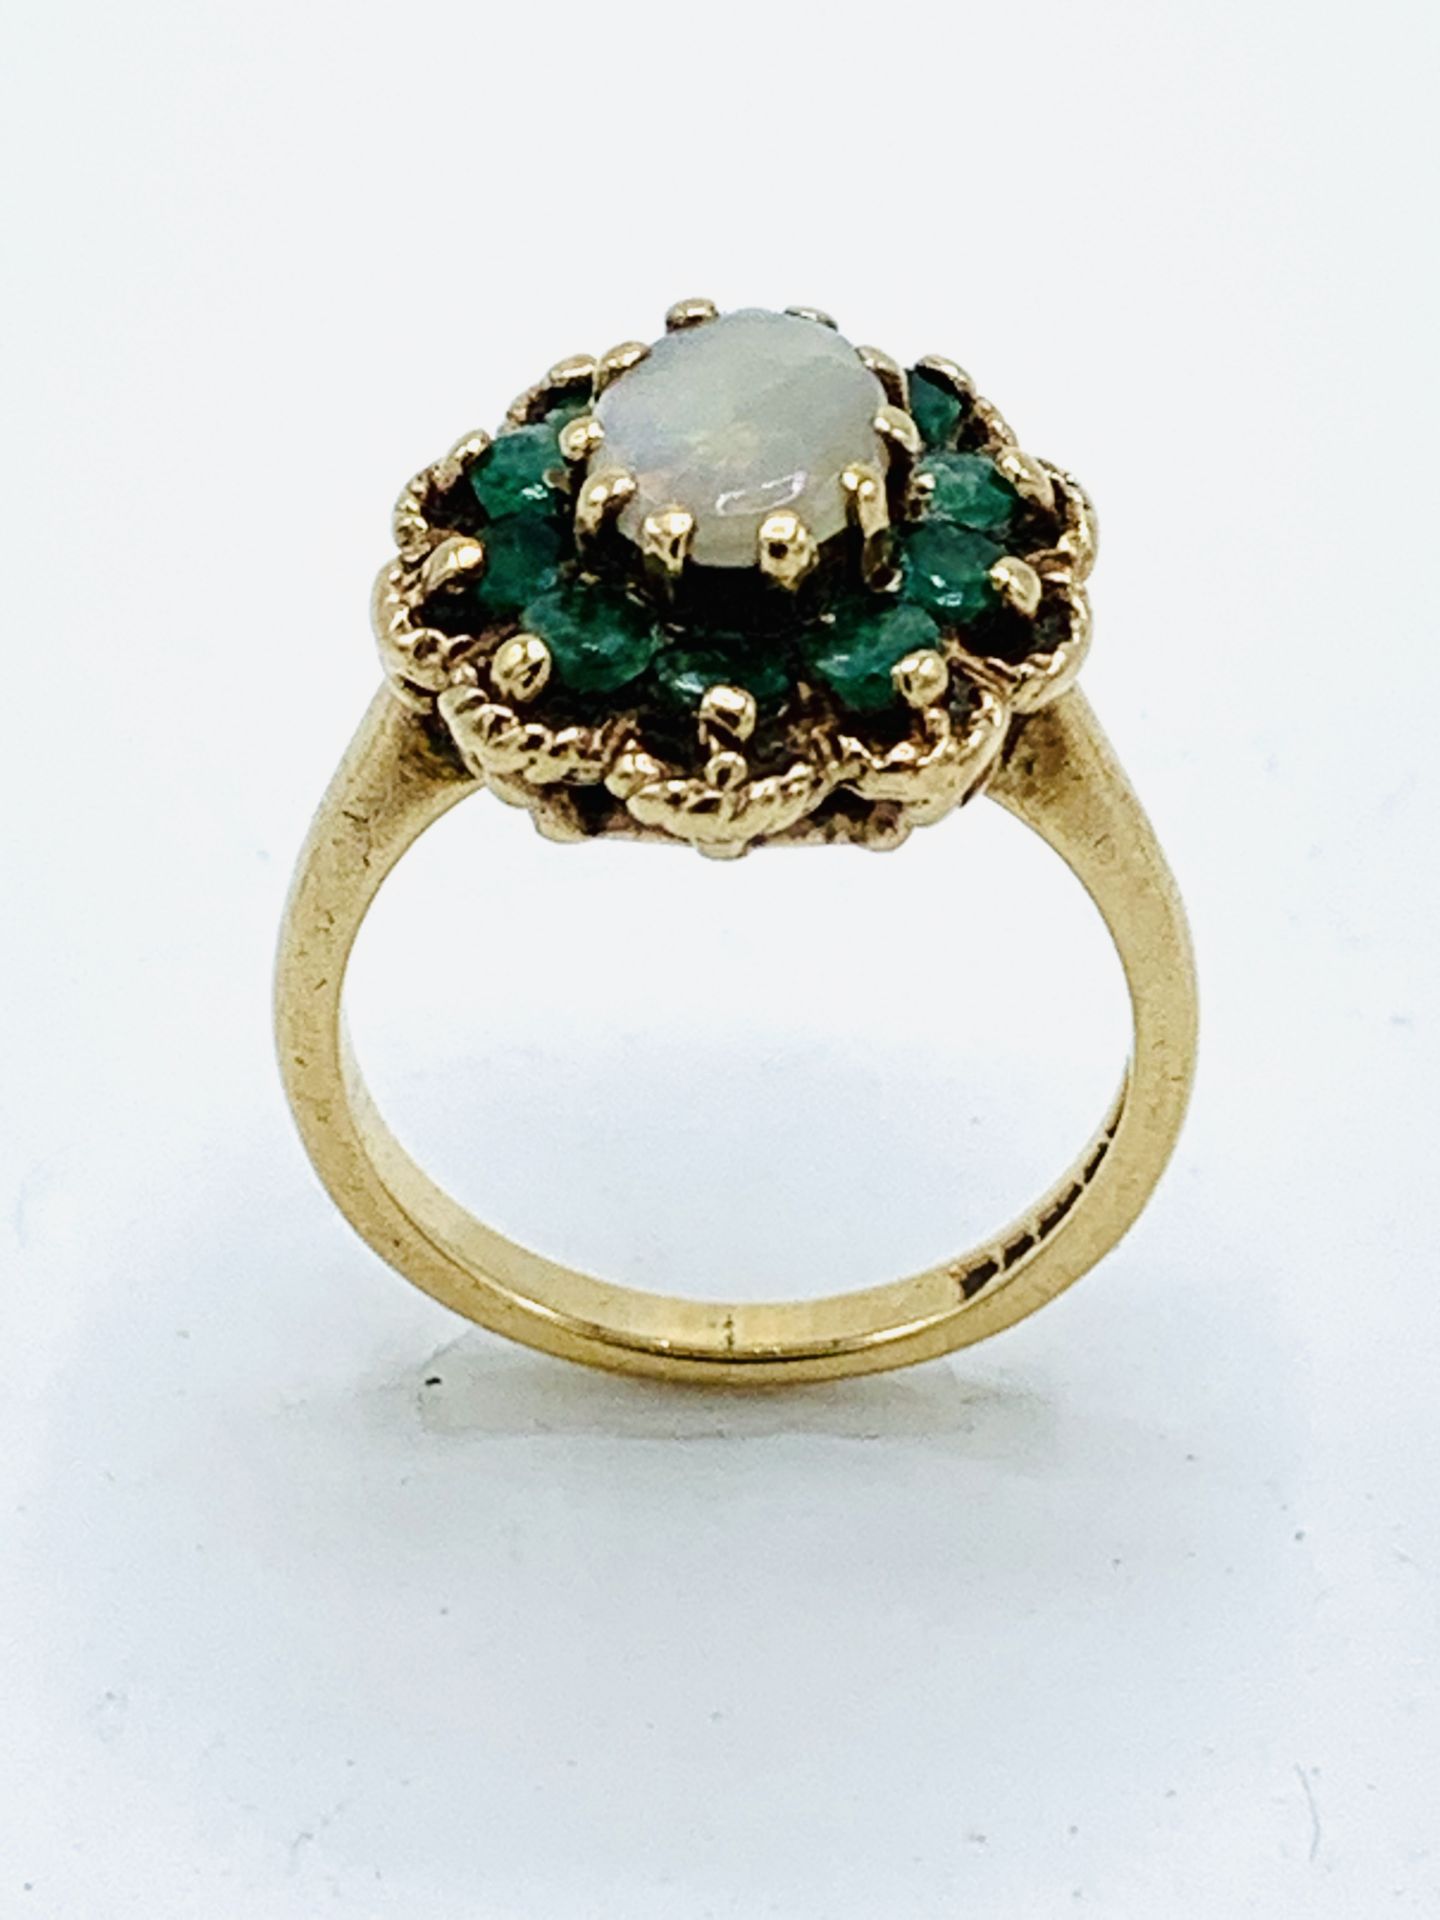 9ct gold, opal and pale green stone ring, 4.5gms